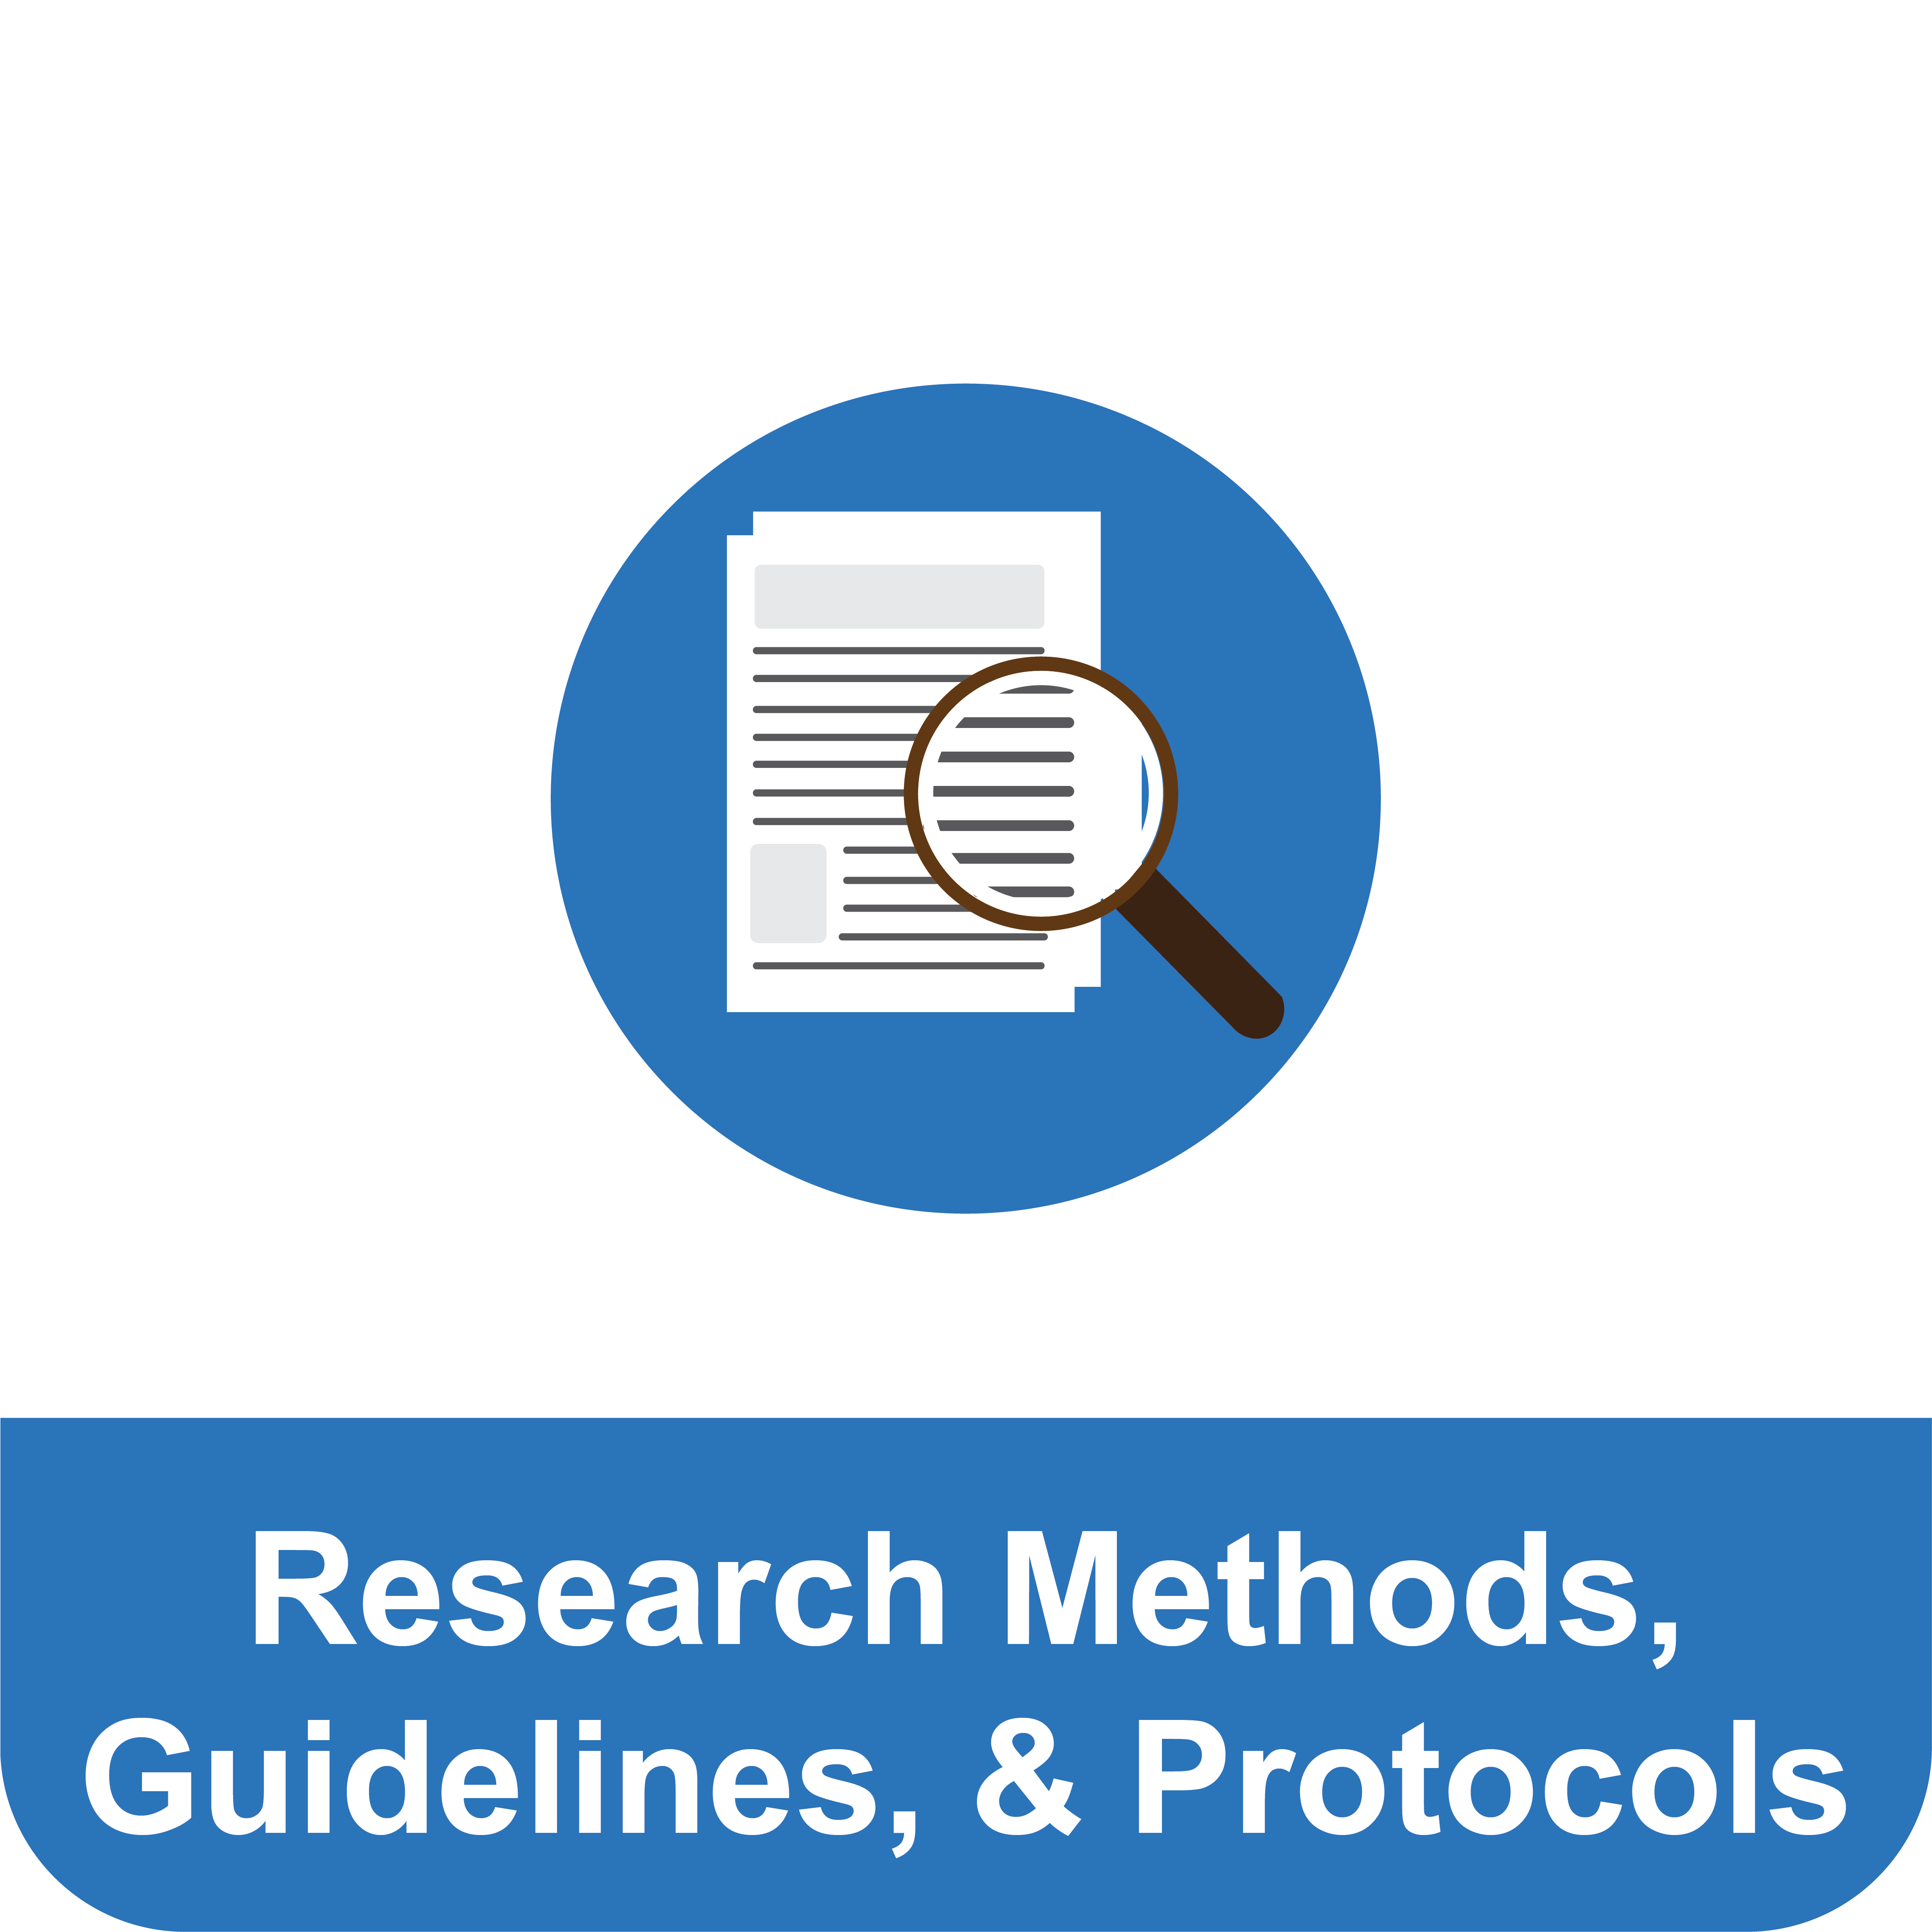 Tile that reads "Research Methods, Guidelines & Protocols" under an icon of a magnifying glass inspecting documents.